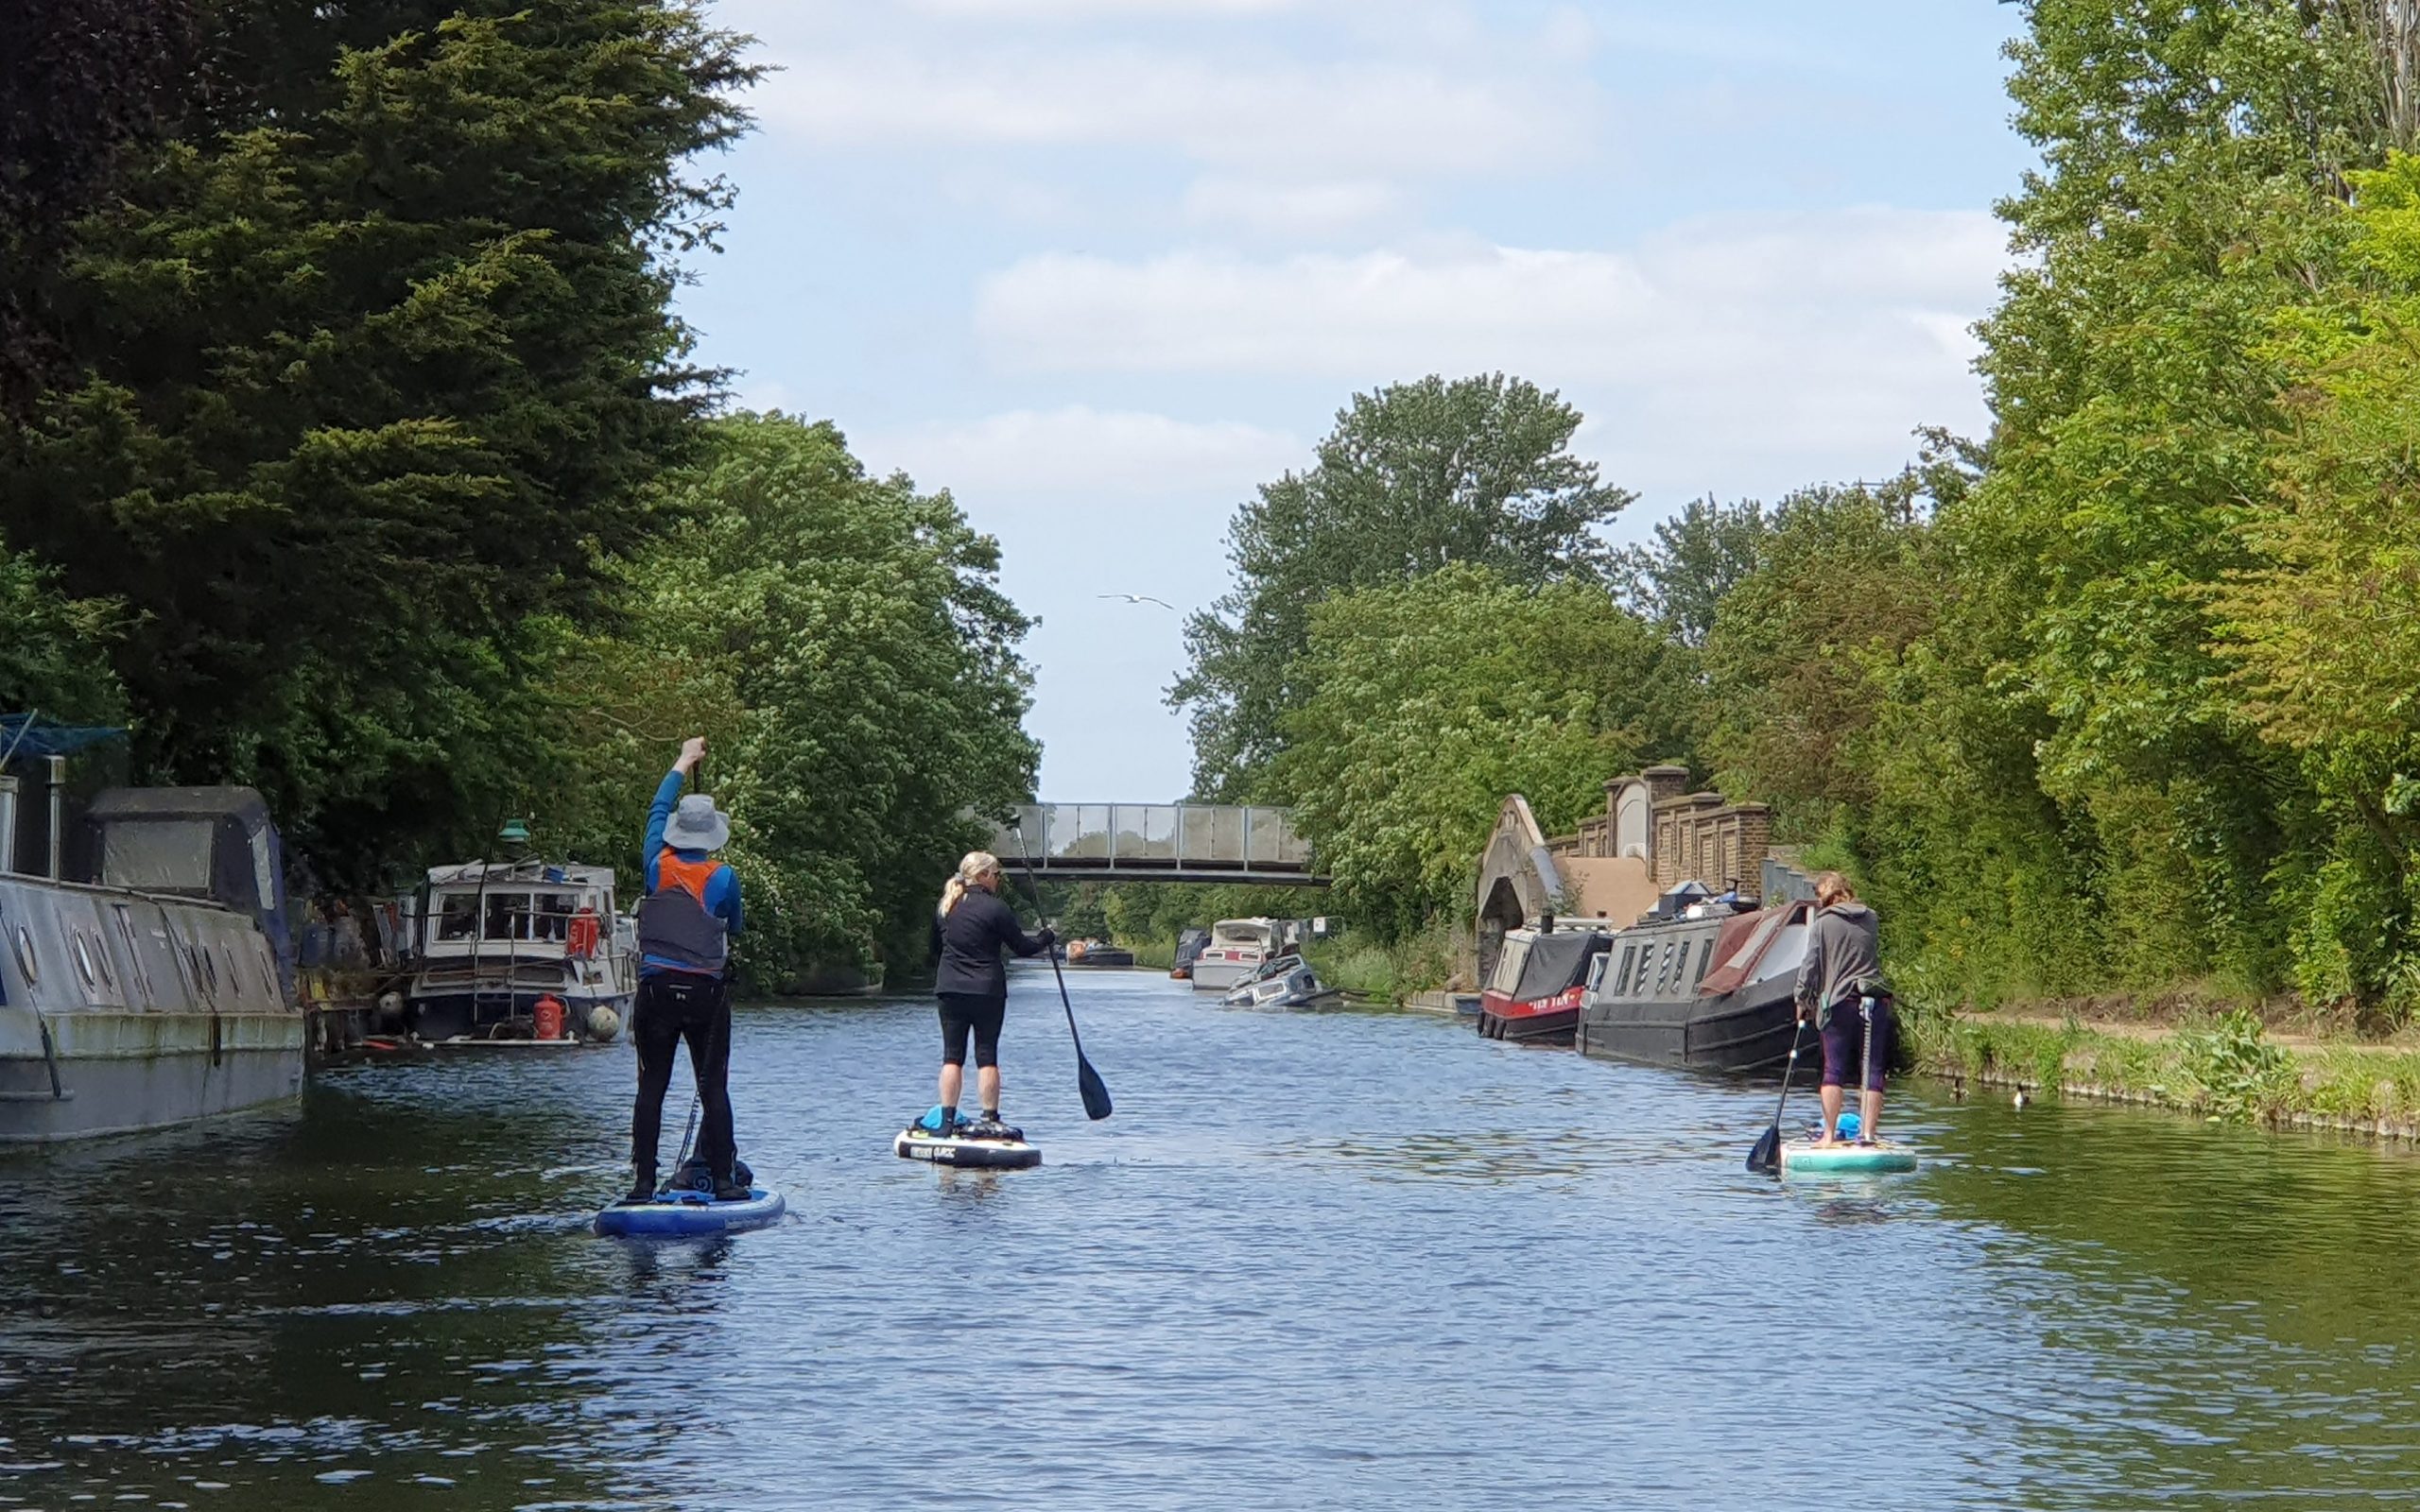 Paddling west on the Grand Union Canal